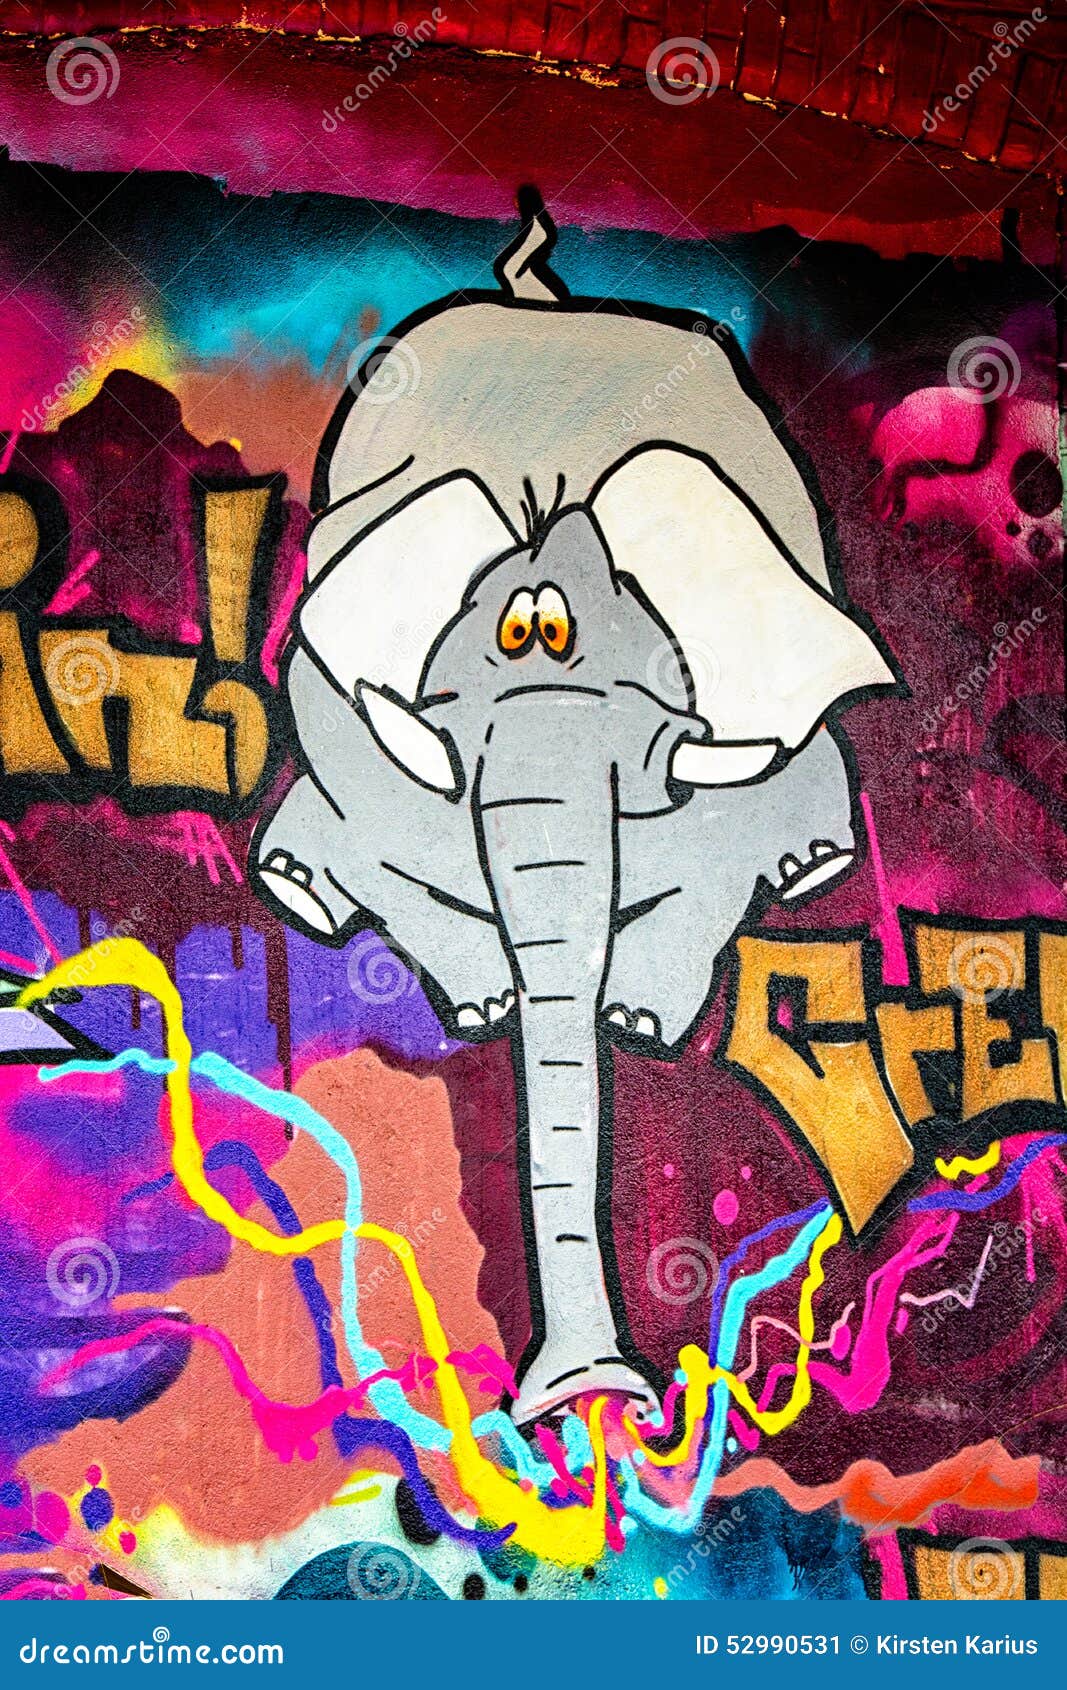 Graffiti Elephant. Graffiti is writing or drawings that have been scribbled, scratched, or sprayed illicitly on a wall or other surface, often in a public place. Graffiti ranges from simple written words to elaborate wall paintings, and it has existed since ancient times, with examples dating back to Ancient Egypt, Ancient Greece, and the Roman Empire